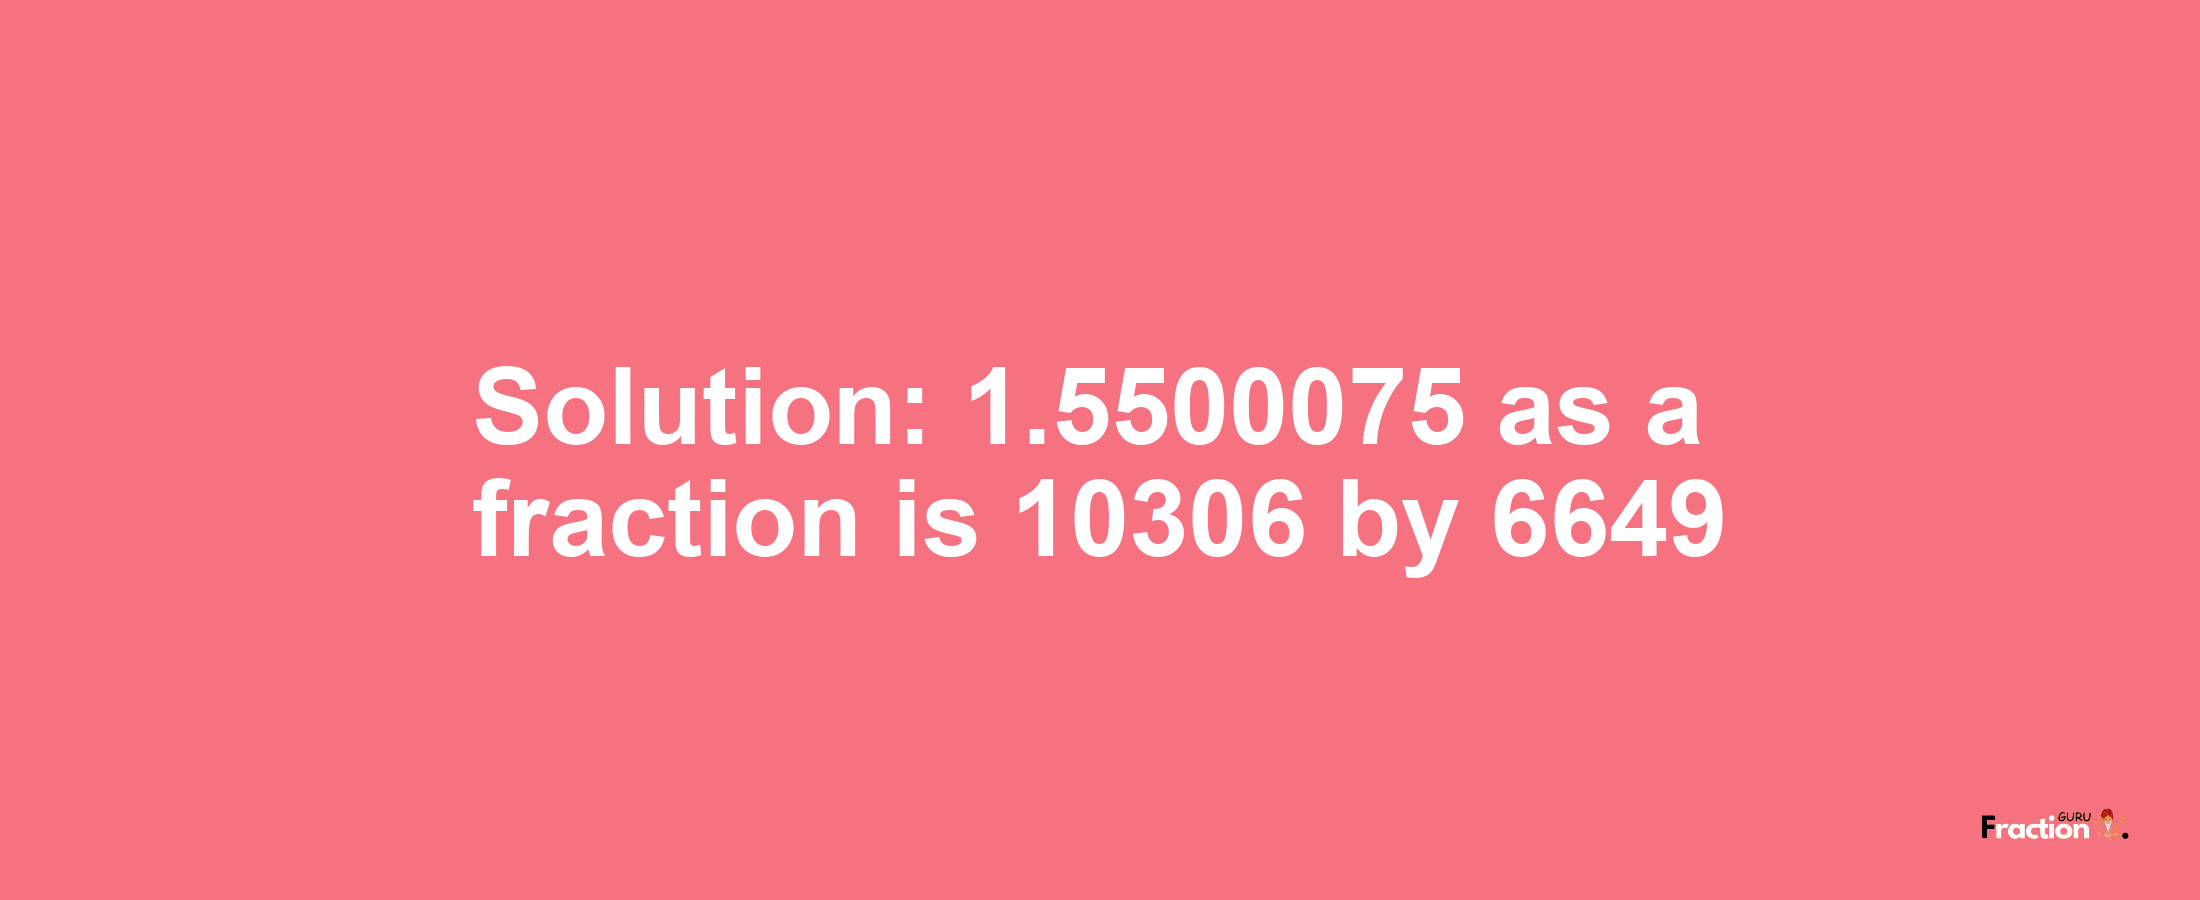 Solution:1.5500075 as a fraction is 10306/6649